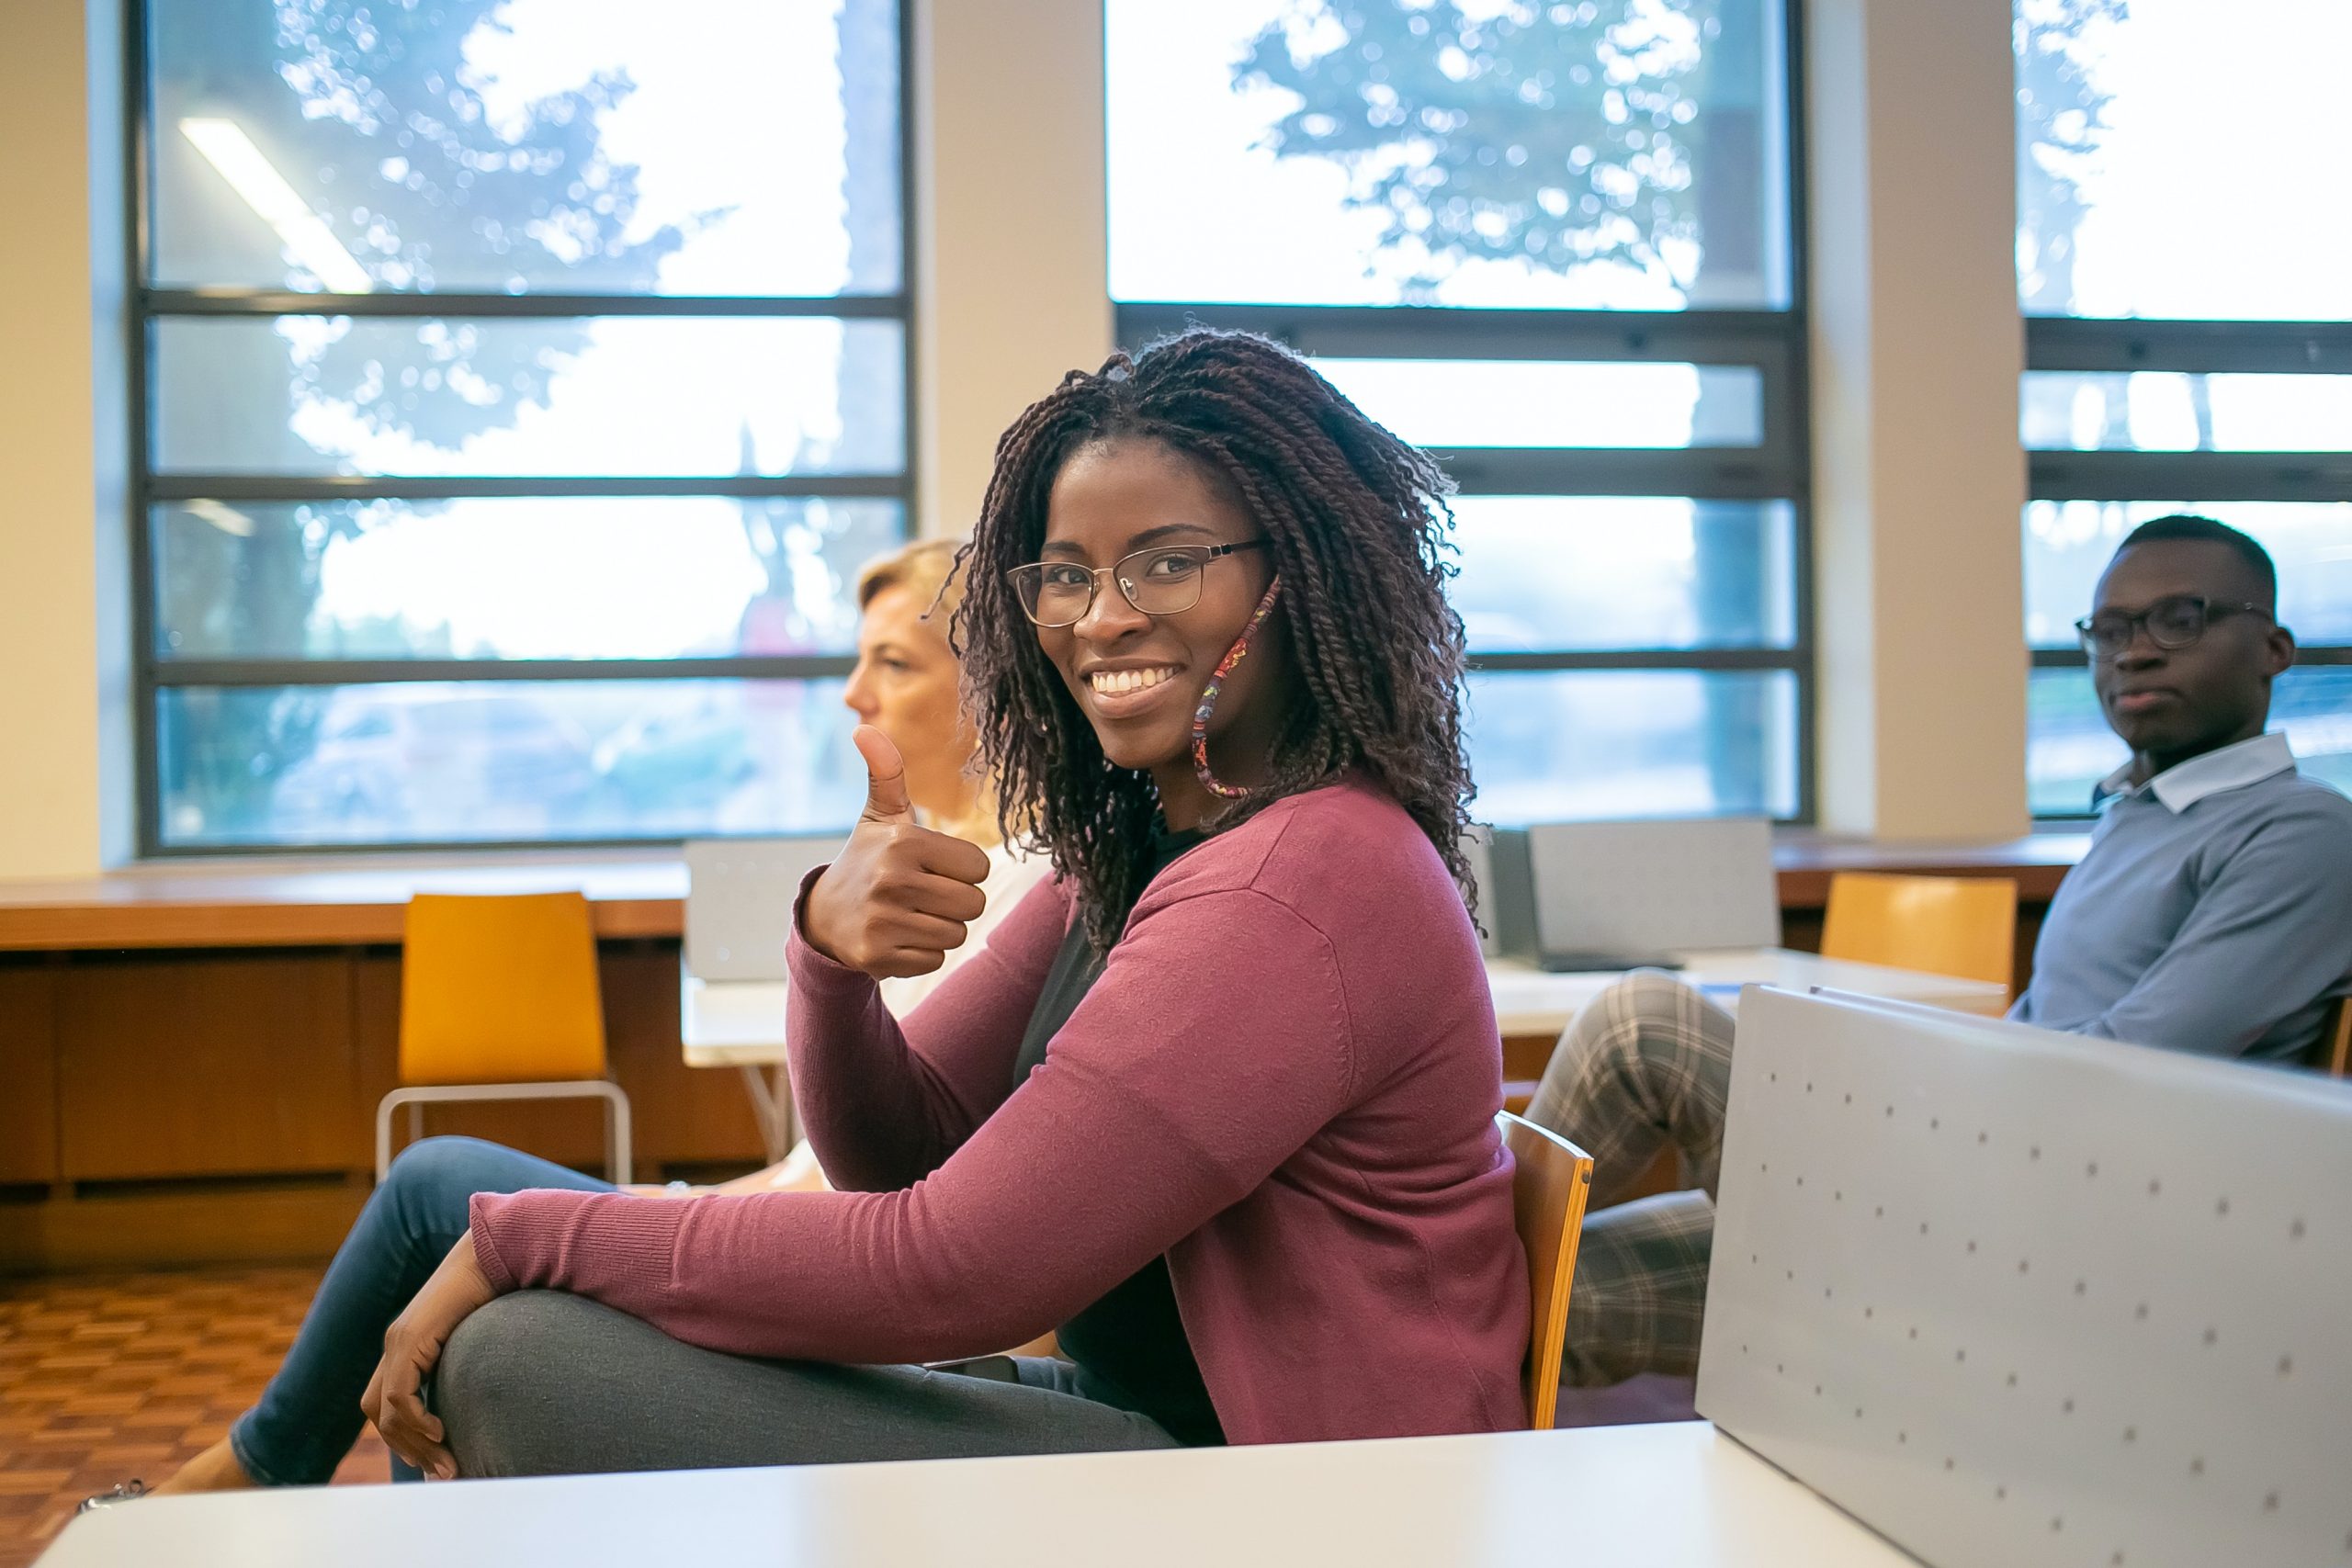 A black student in a red cardigan and glasses gives a thumbs-up to the camera